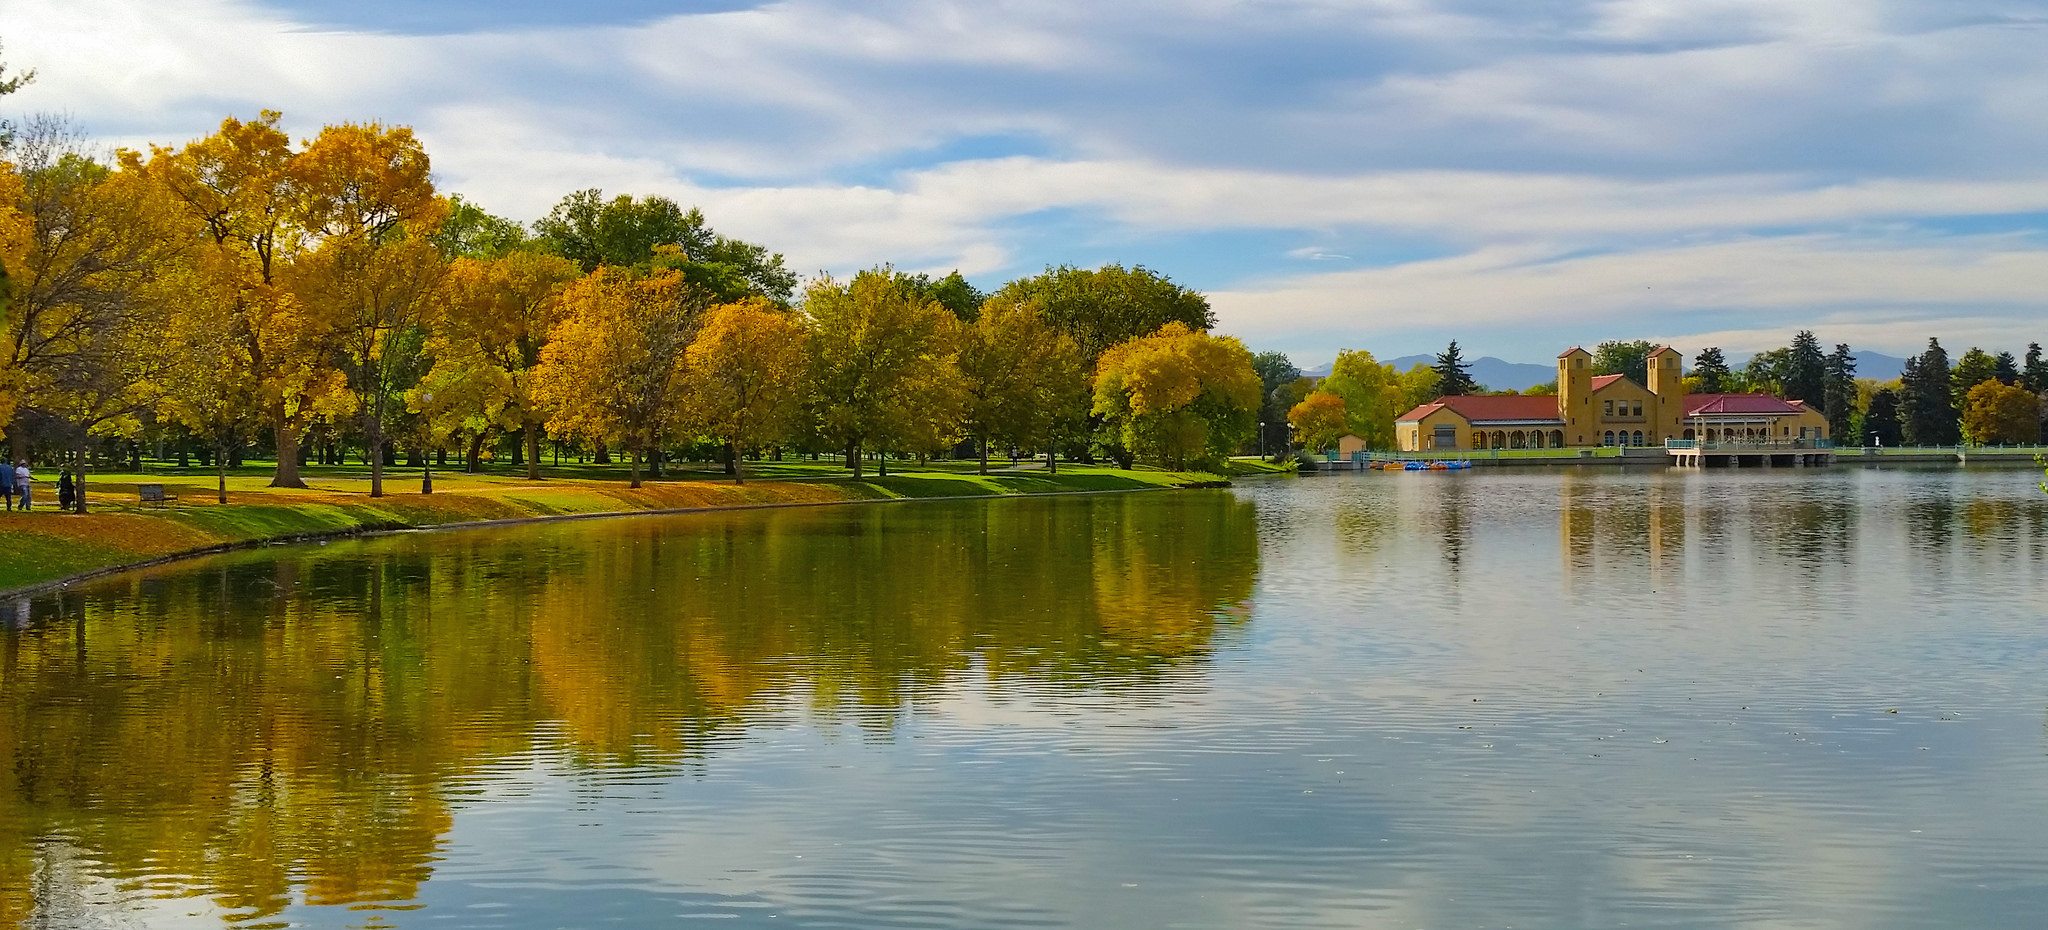 3 great spots to see the fall colors in Denver Be A Smart Ash